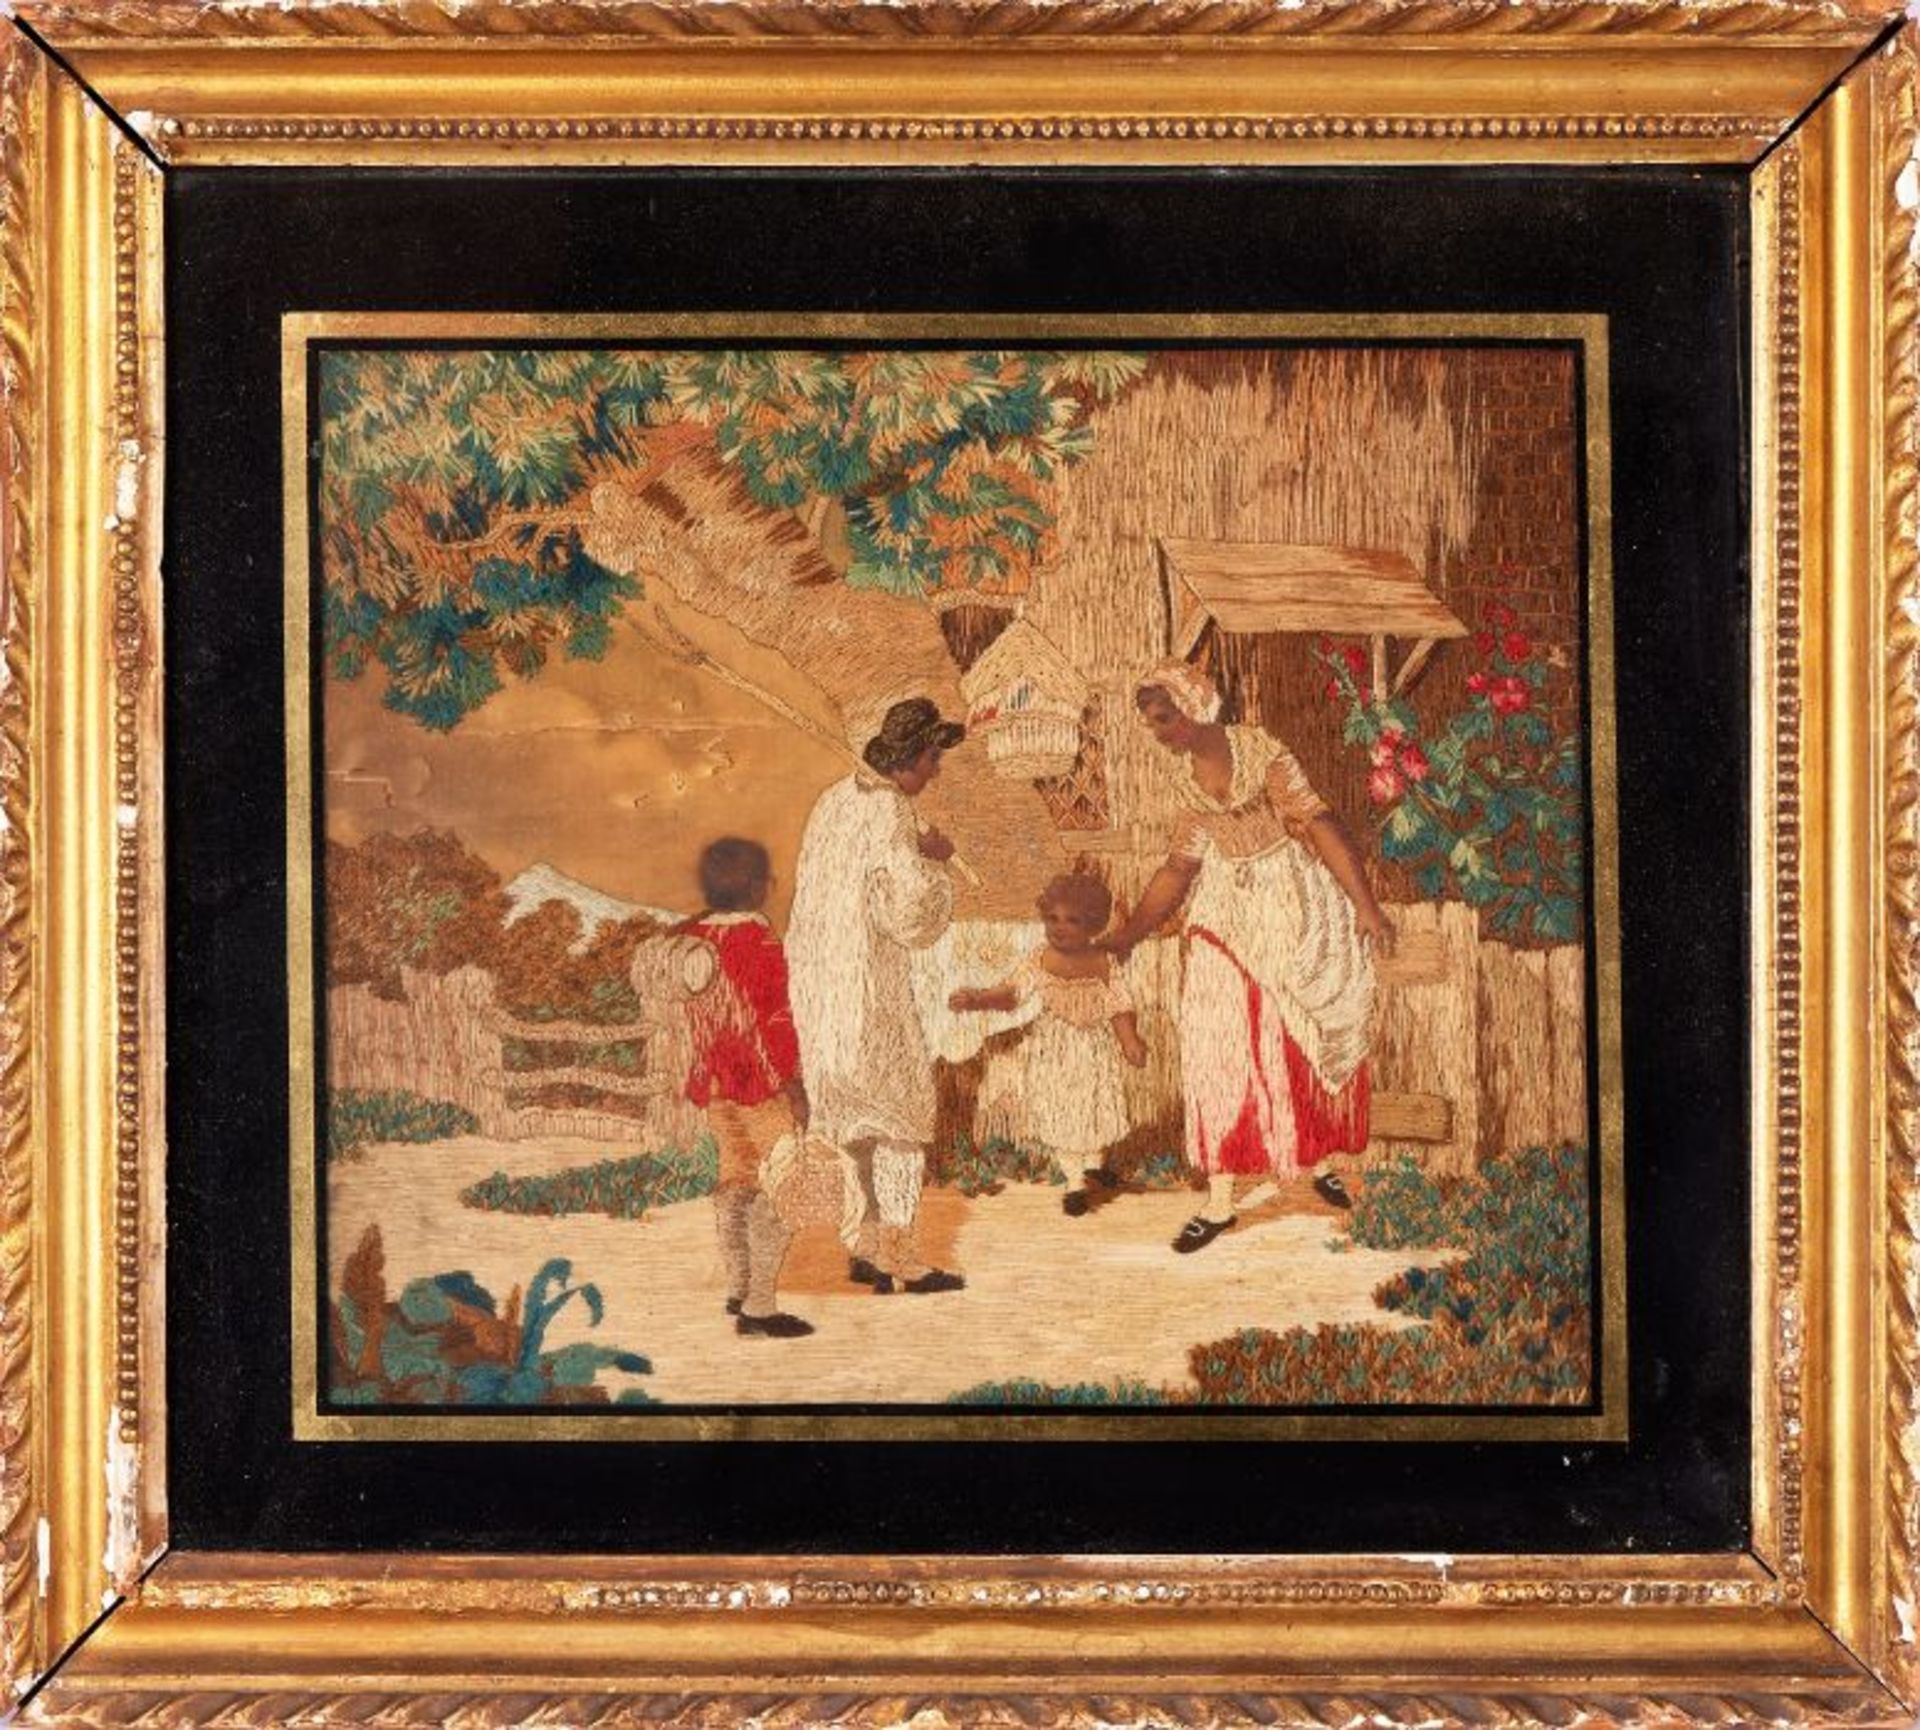 An early 19th century English silk embroidered picture